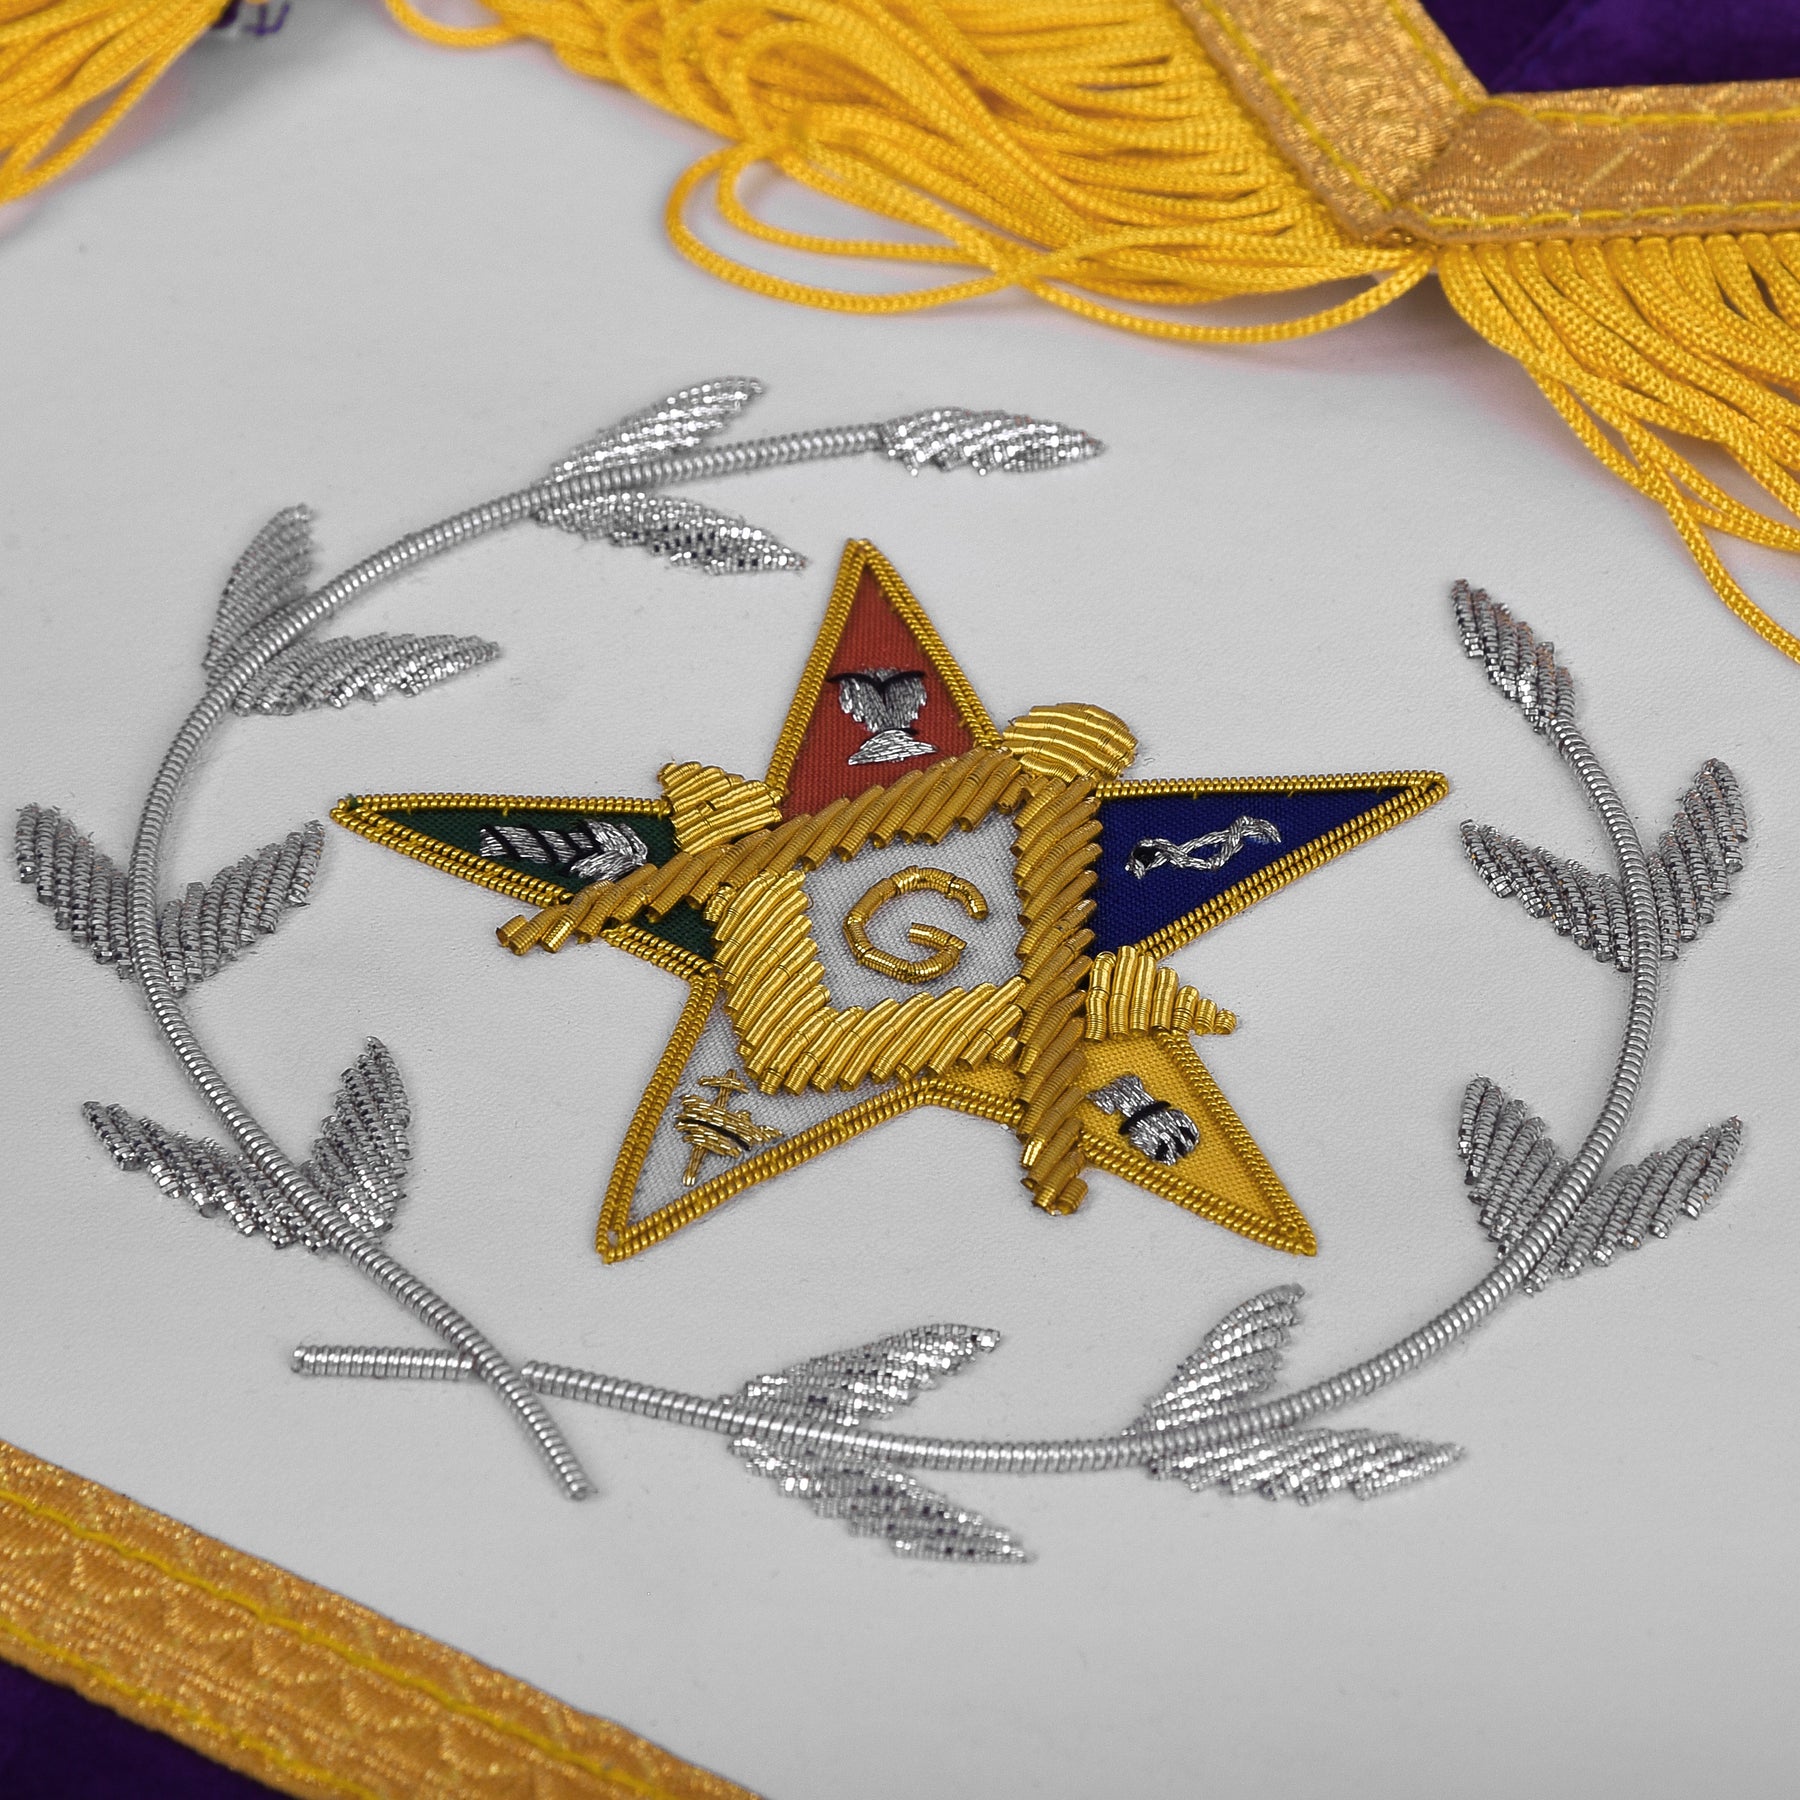 Worthy Patron OES Apron - Purple Velvet With Square & Compass G With Silver Wreath - Bricks Masons